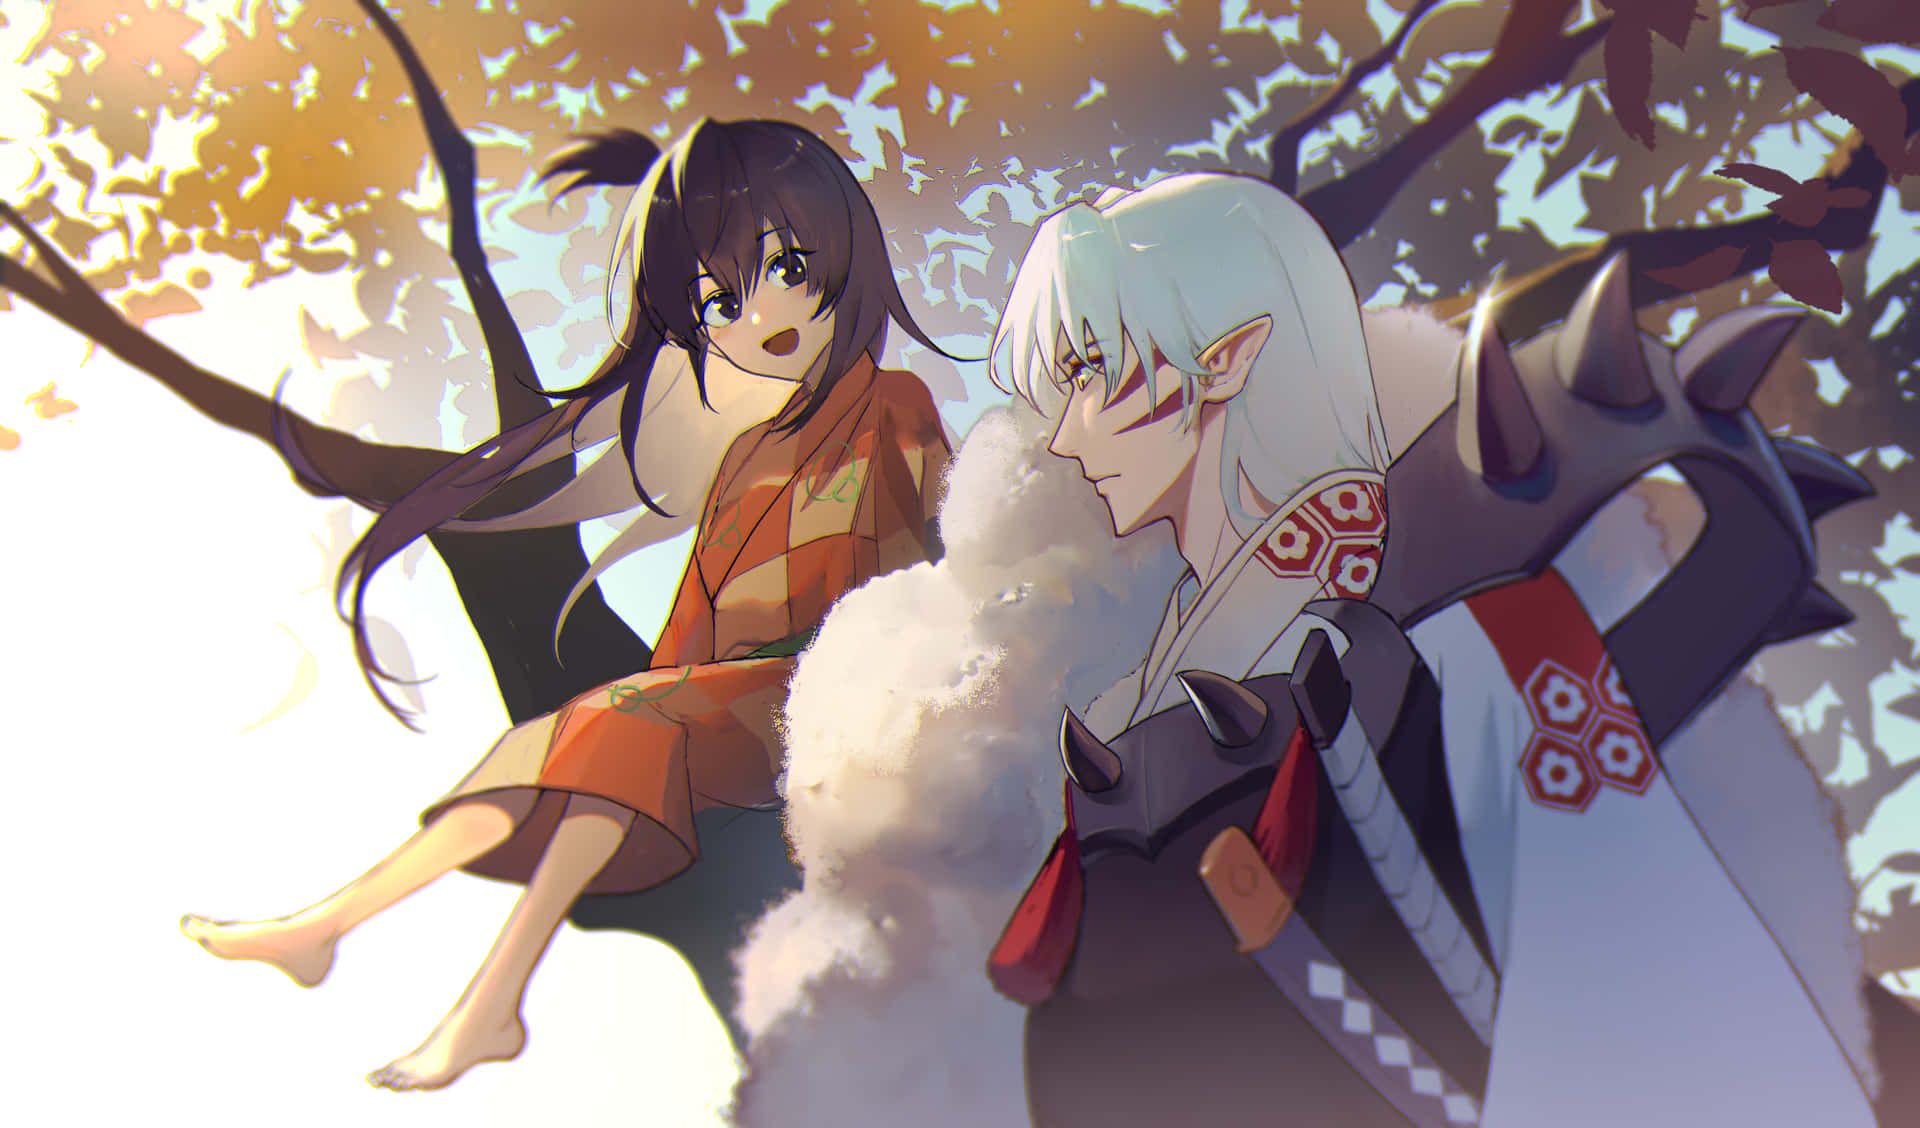 Inuyasha protecting Rin in a beautiful forest scenery Wallpaper